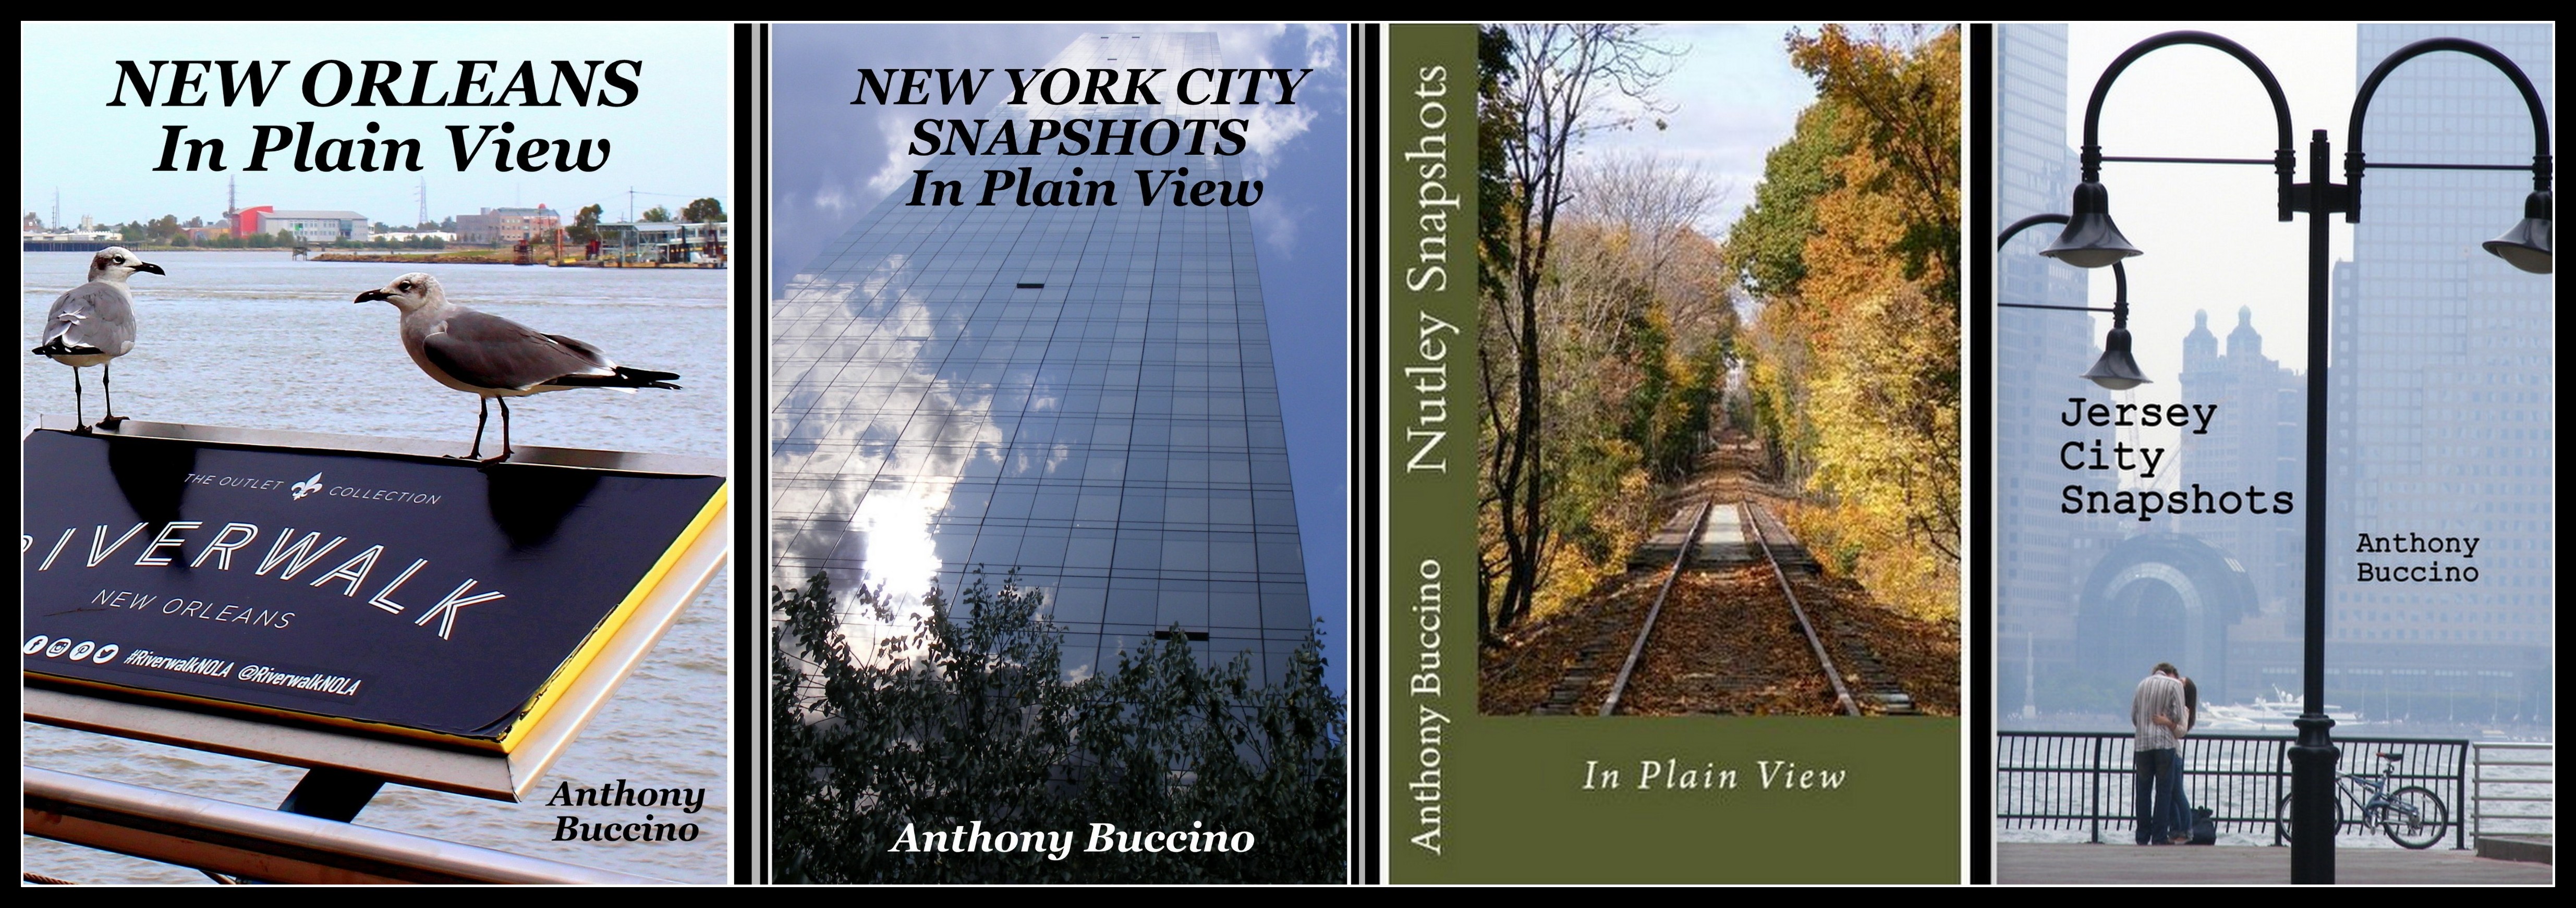 Photo collecctions, NOLA in Plain View, NYC In Plain View, JC Snapshots, Nutley Snapshots, photo books by Anthony Buccino